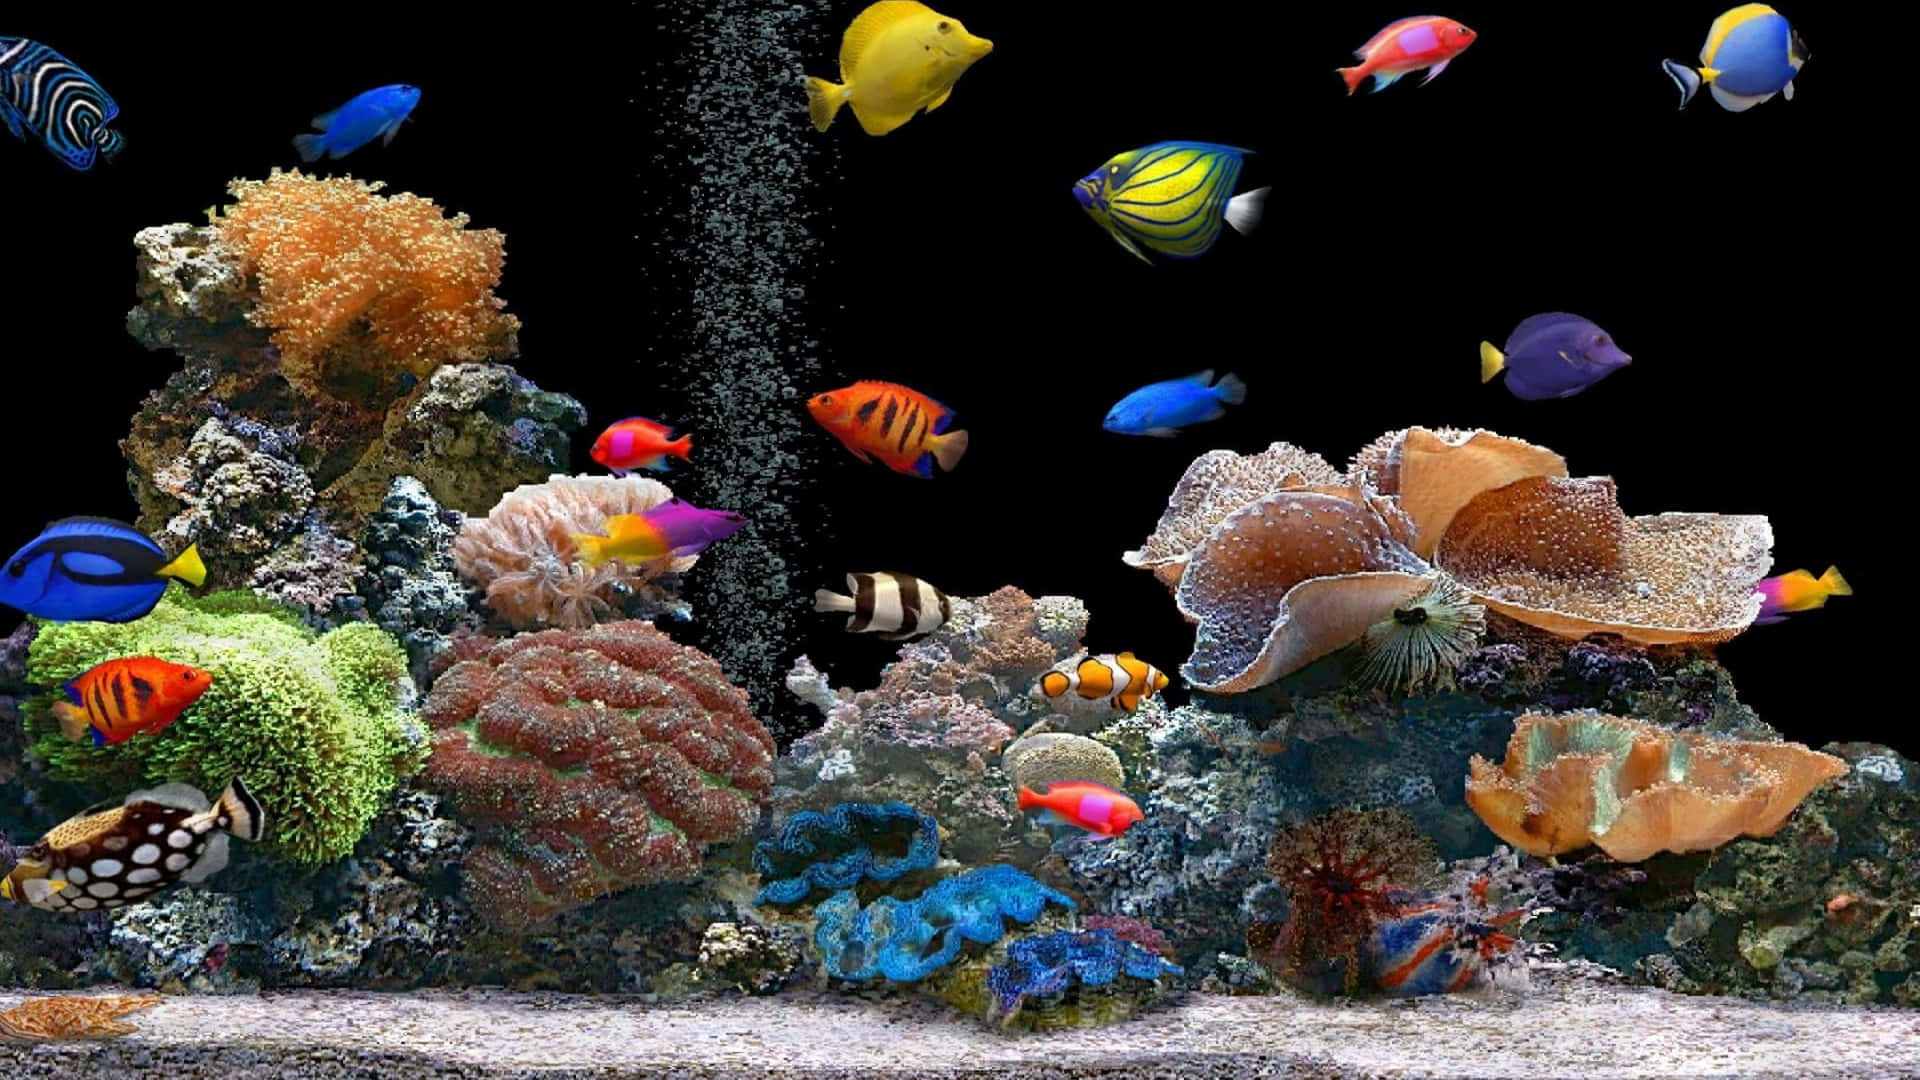 4K Fish And Other Sea Creatures In An Aquarium Wallpaper